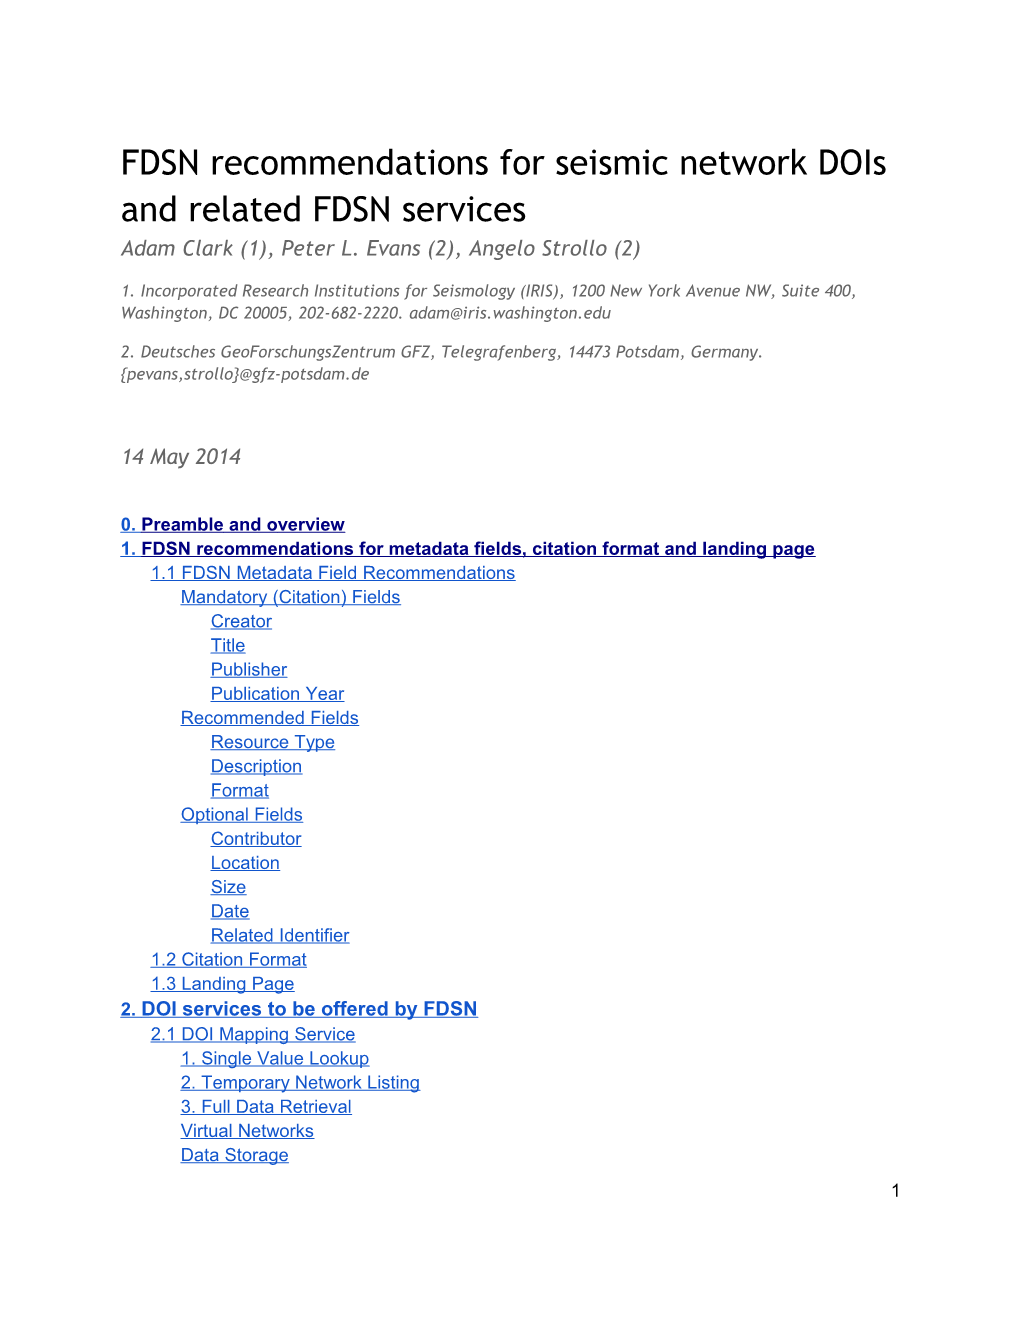 FDSN Recommendations for Seismic Network Dois and Related FDSN Services